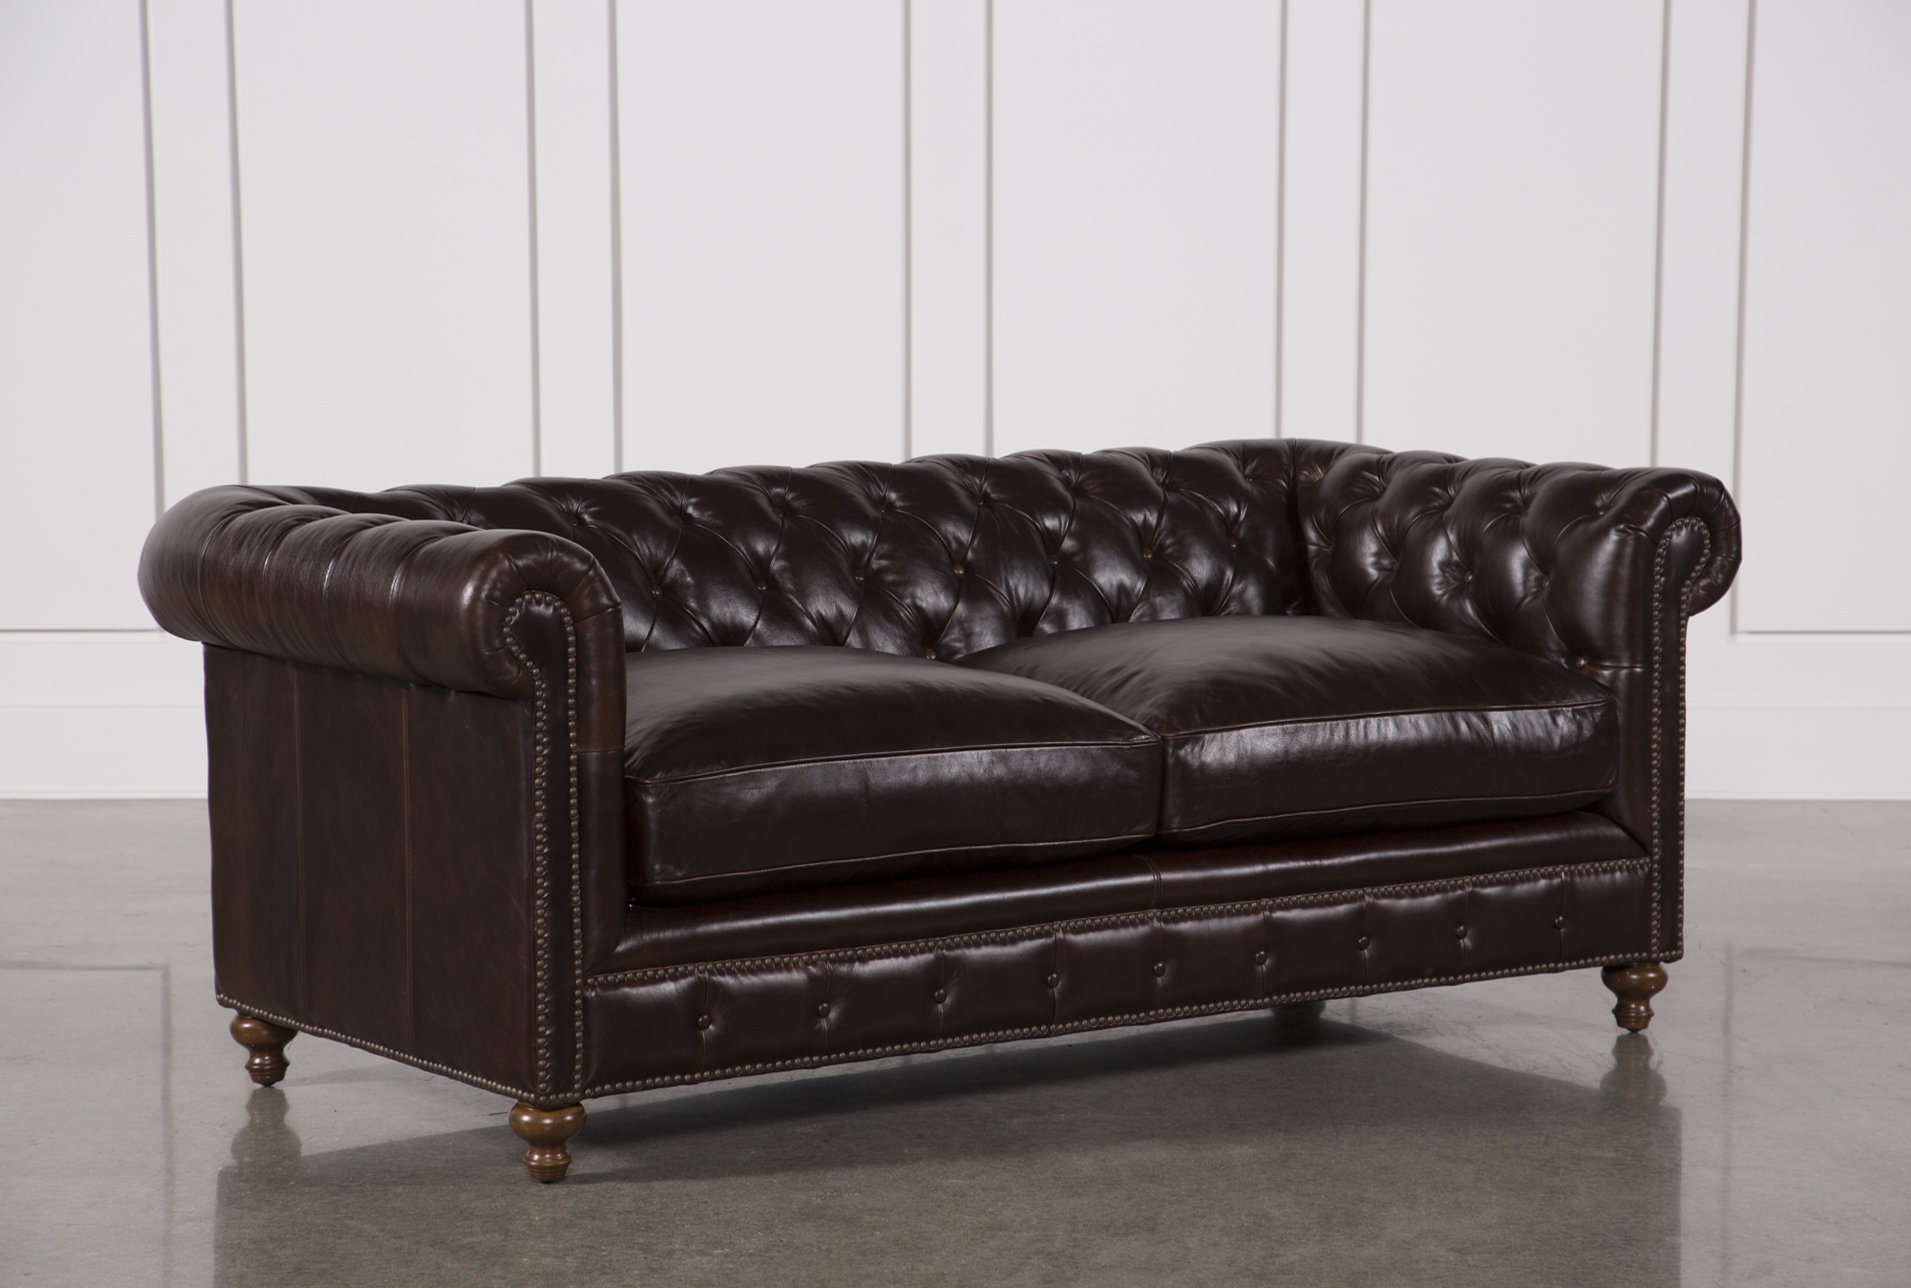 Mansfield 86 Inch Cocoa Leather Sofa (Qty: 1) has been successfully added  to your Cart.